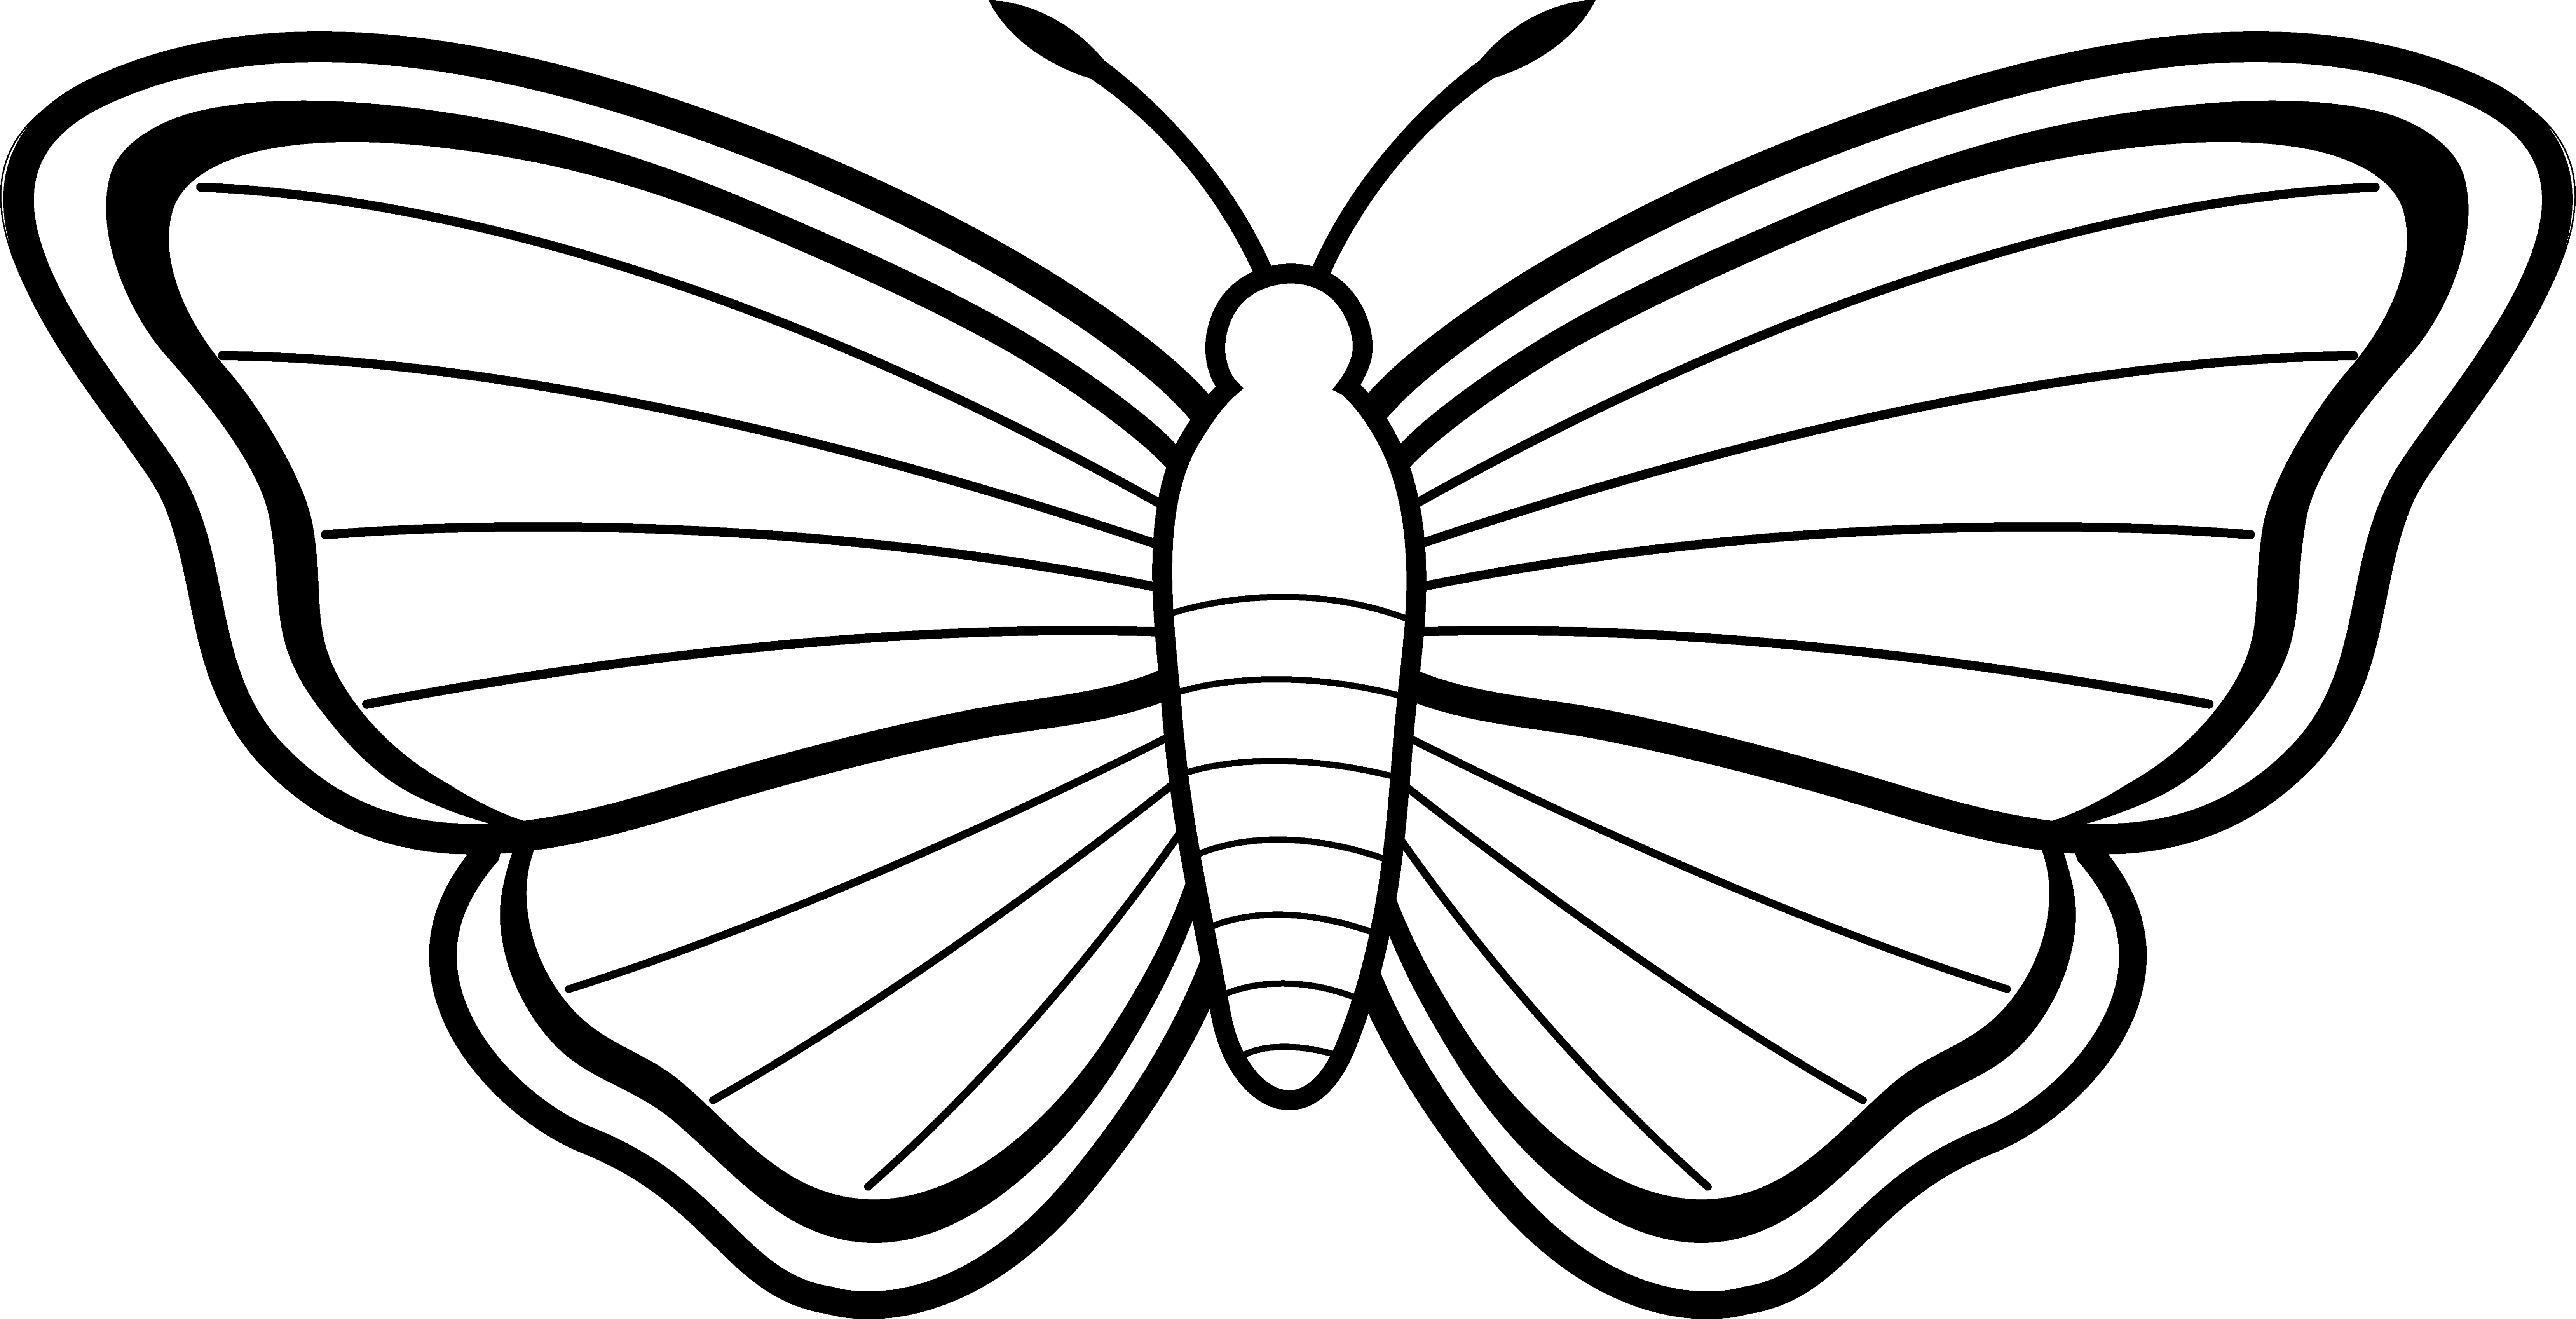 Butterfly clipart black and white